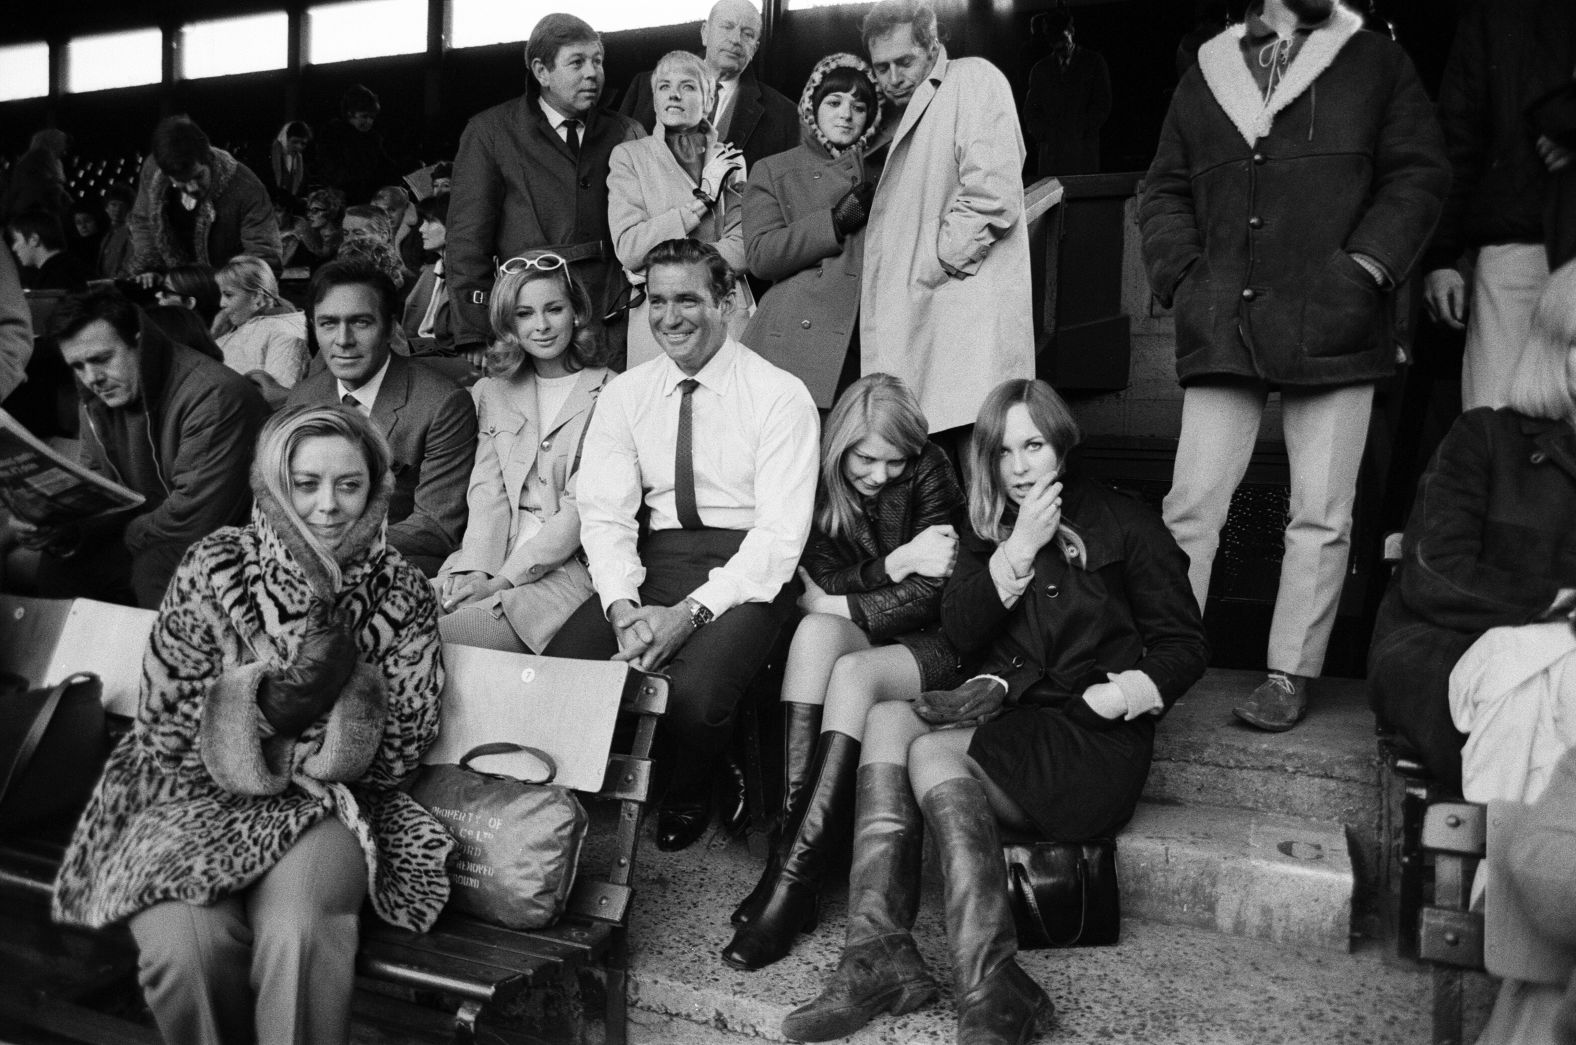 Plummer joins film stars Rod Taylor, Camilla Sparv and 175 extras in the stands at Wimbledon in 1966. They were shooting the film "Nobody Runs Forever."